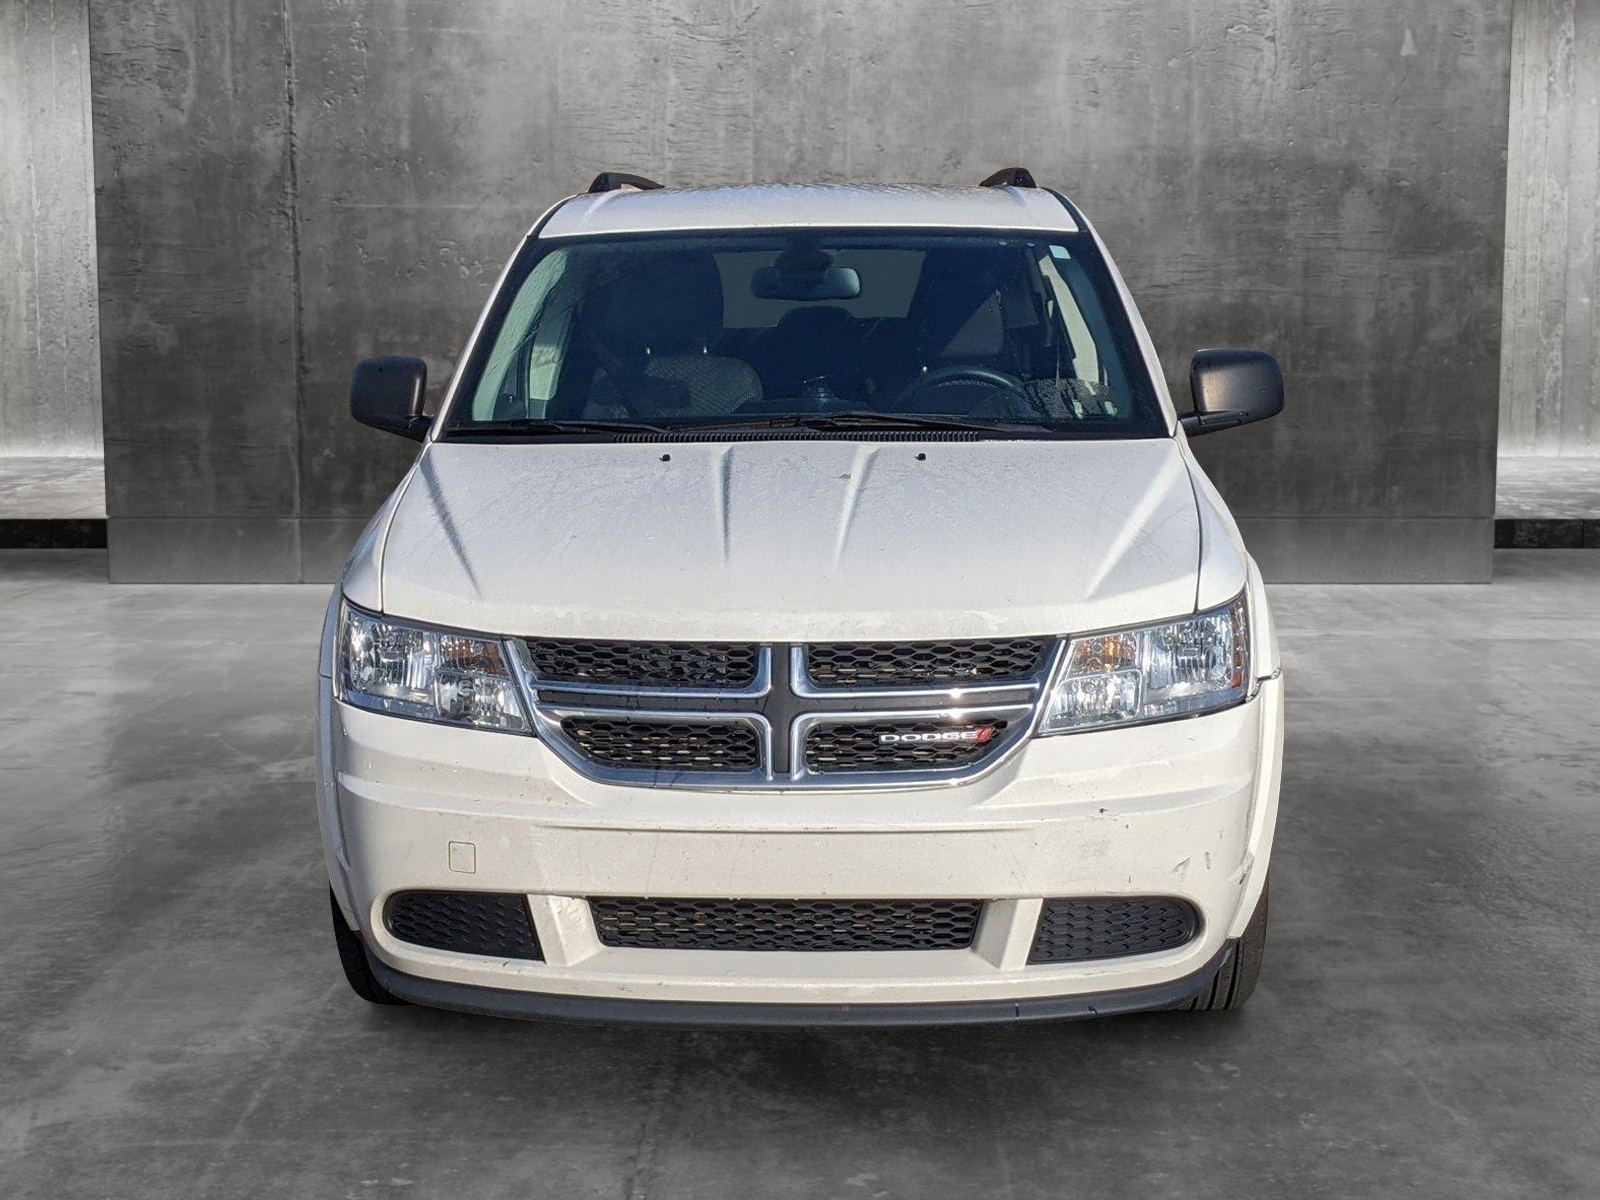 Used 2019 Dodge Journey SE with VIN 3C4PDCAB6KT797638 for sale in Hayward, CA